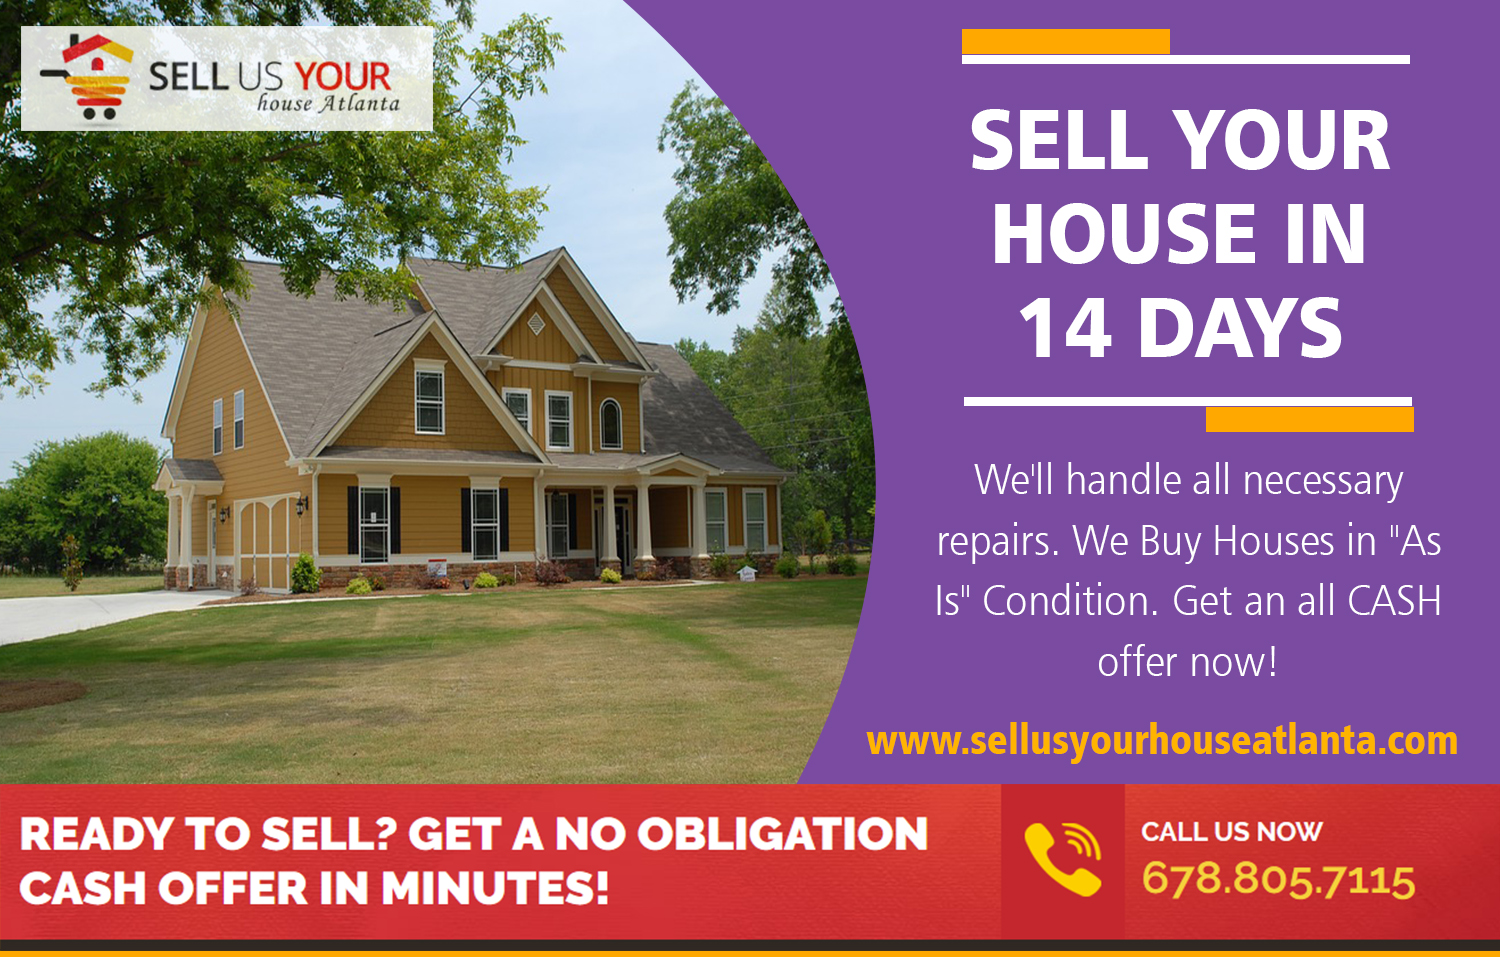 Sell Your House in 14 Days - sellusyourhouseatlanta's diary